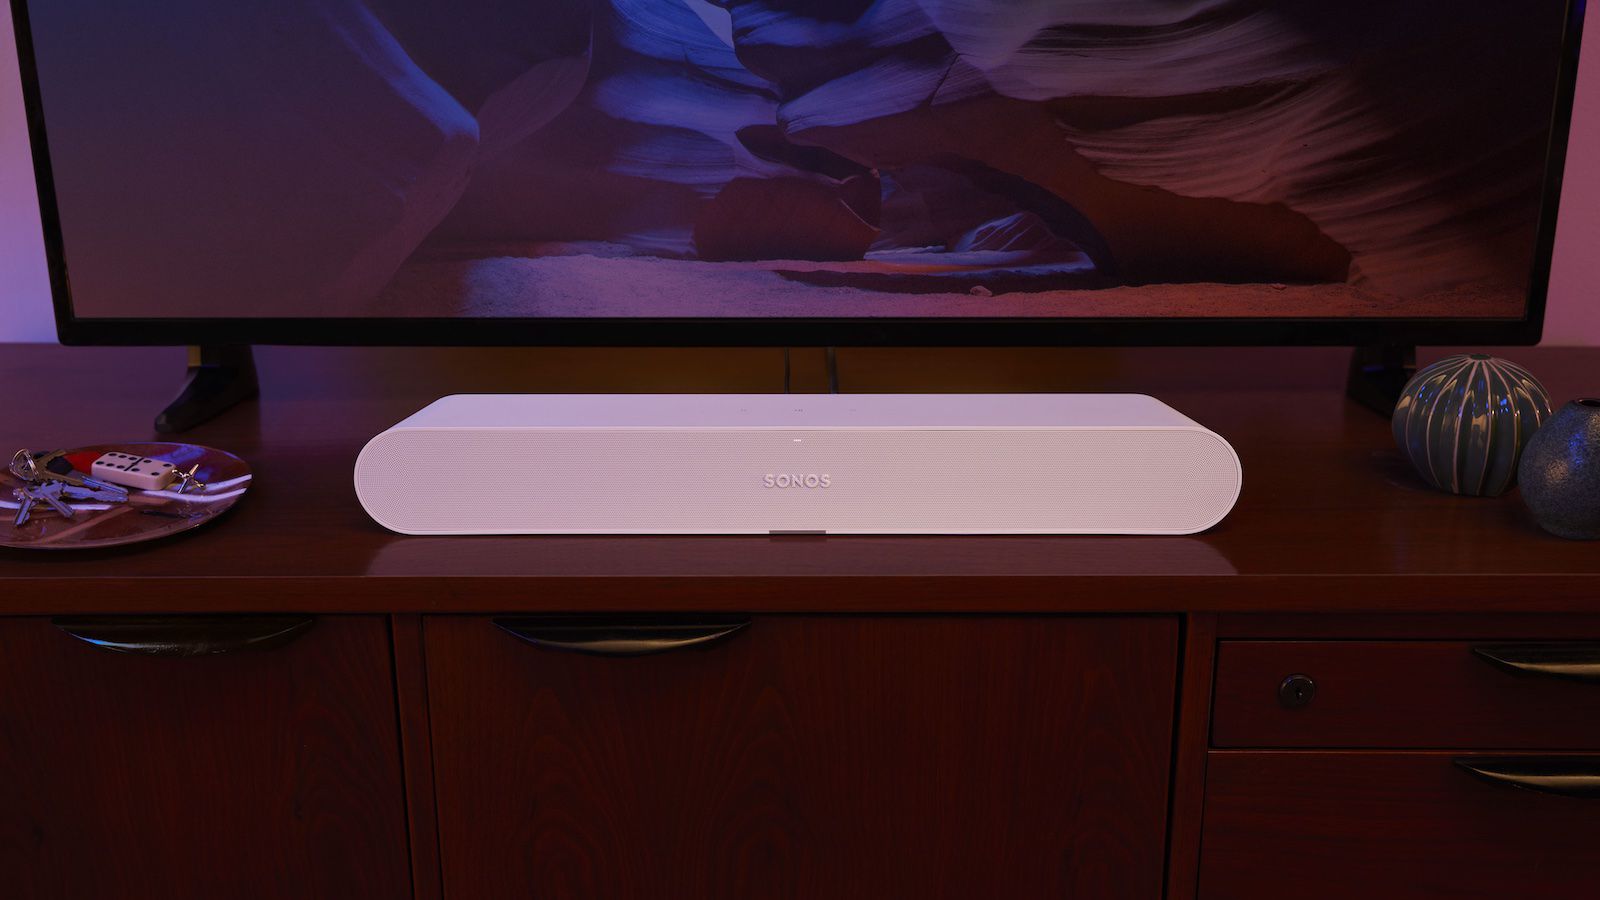 mirakel smidig smuk Sonos Announces Lower-Priced Soundbar With AirPlay 2 Support, 'Hey Sonos'  Voice Control for Apple Music - MacRumors